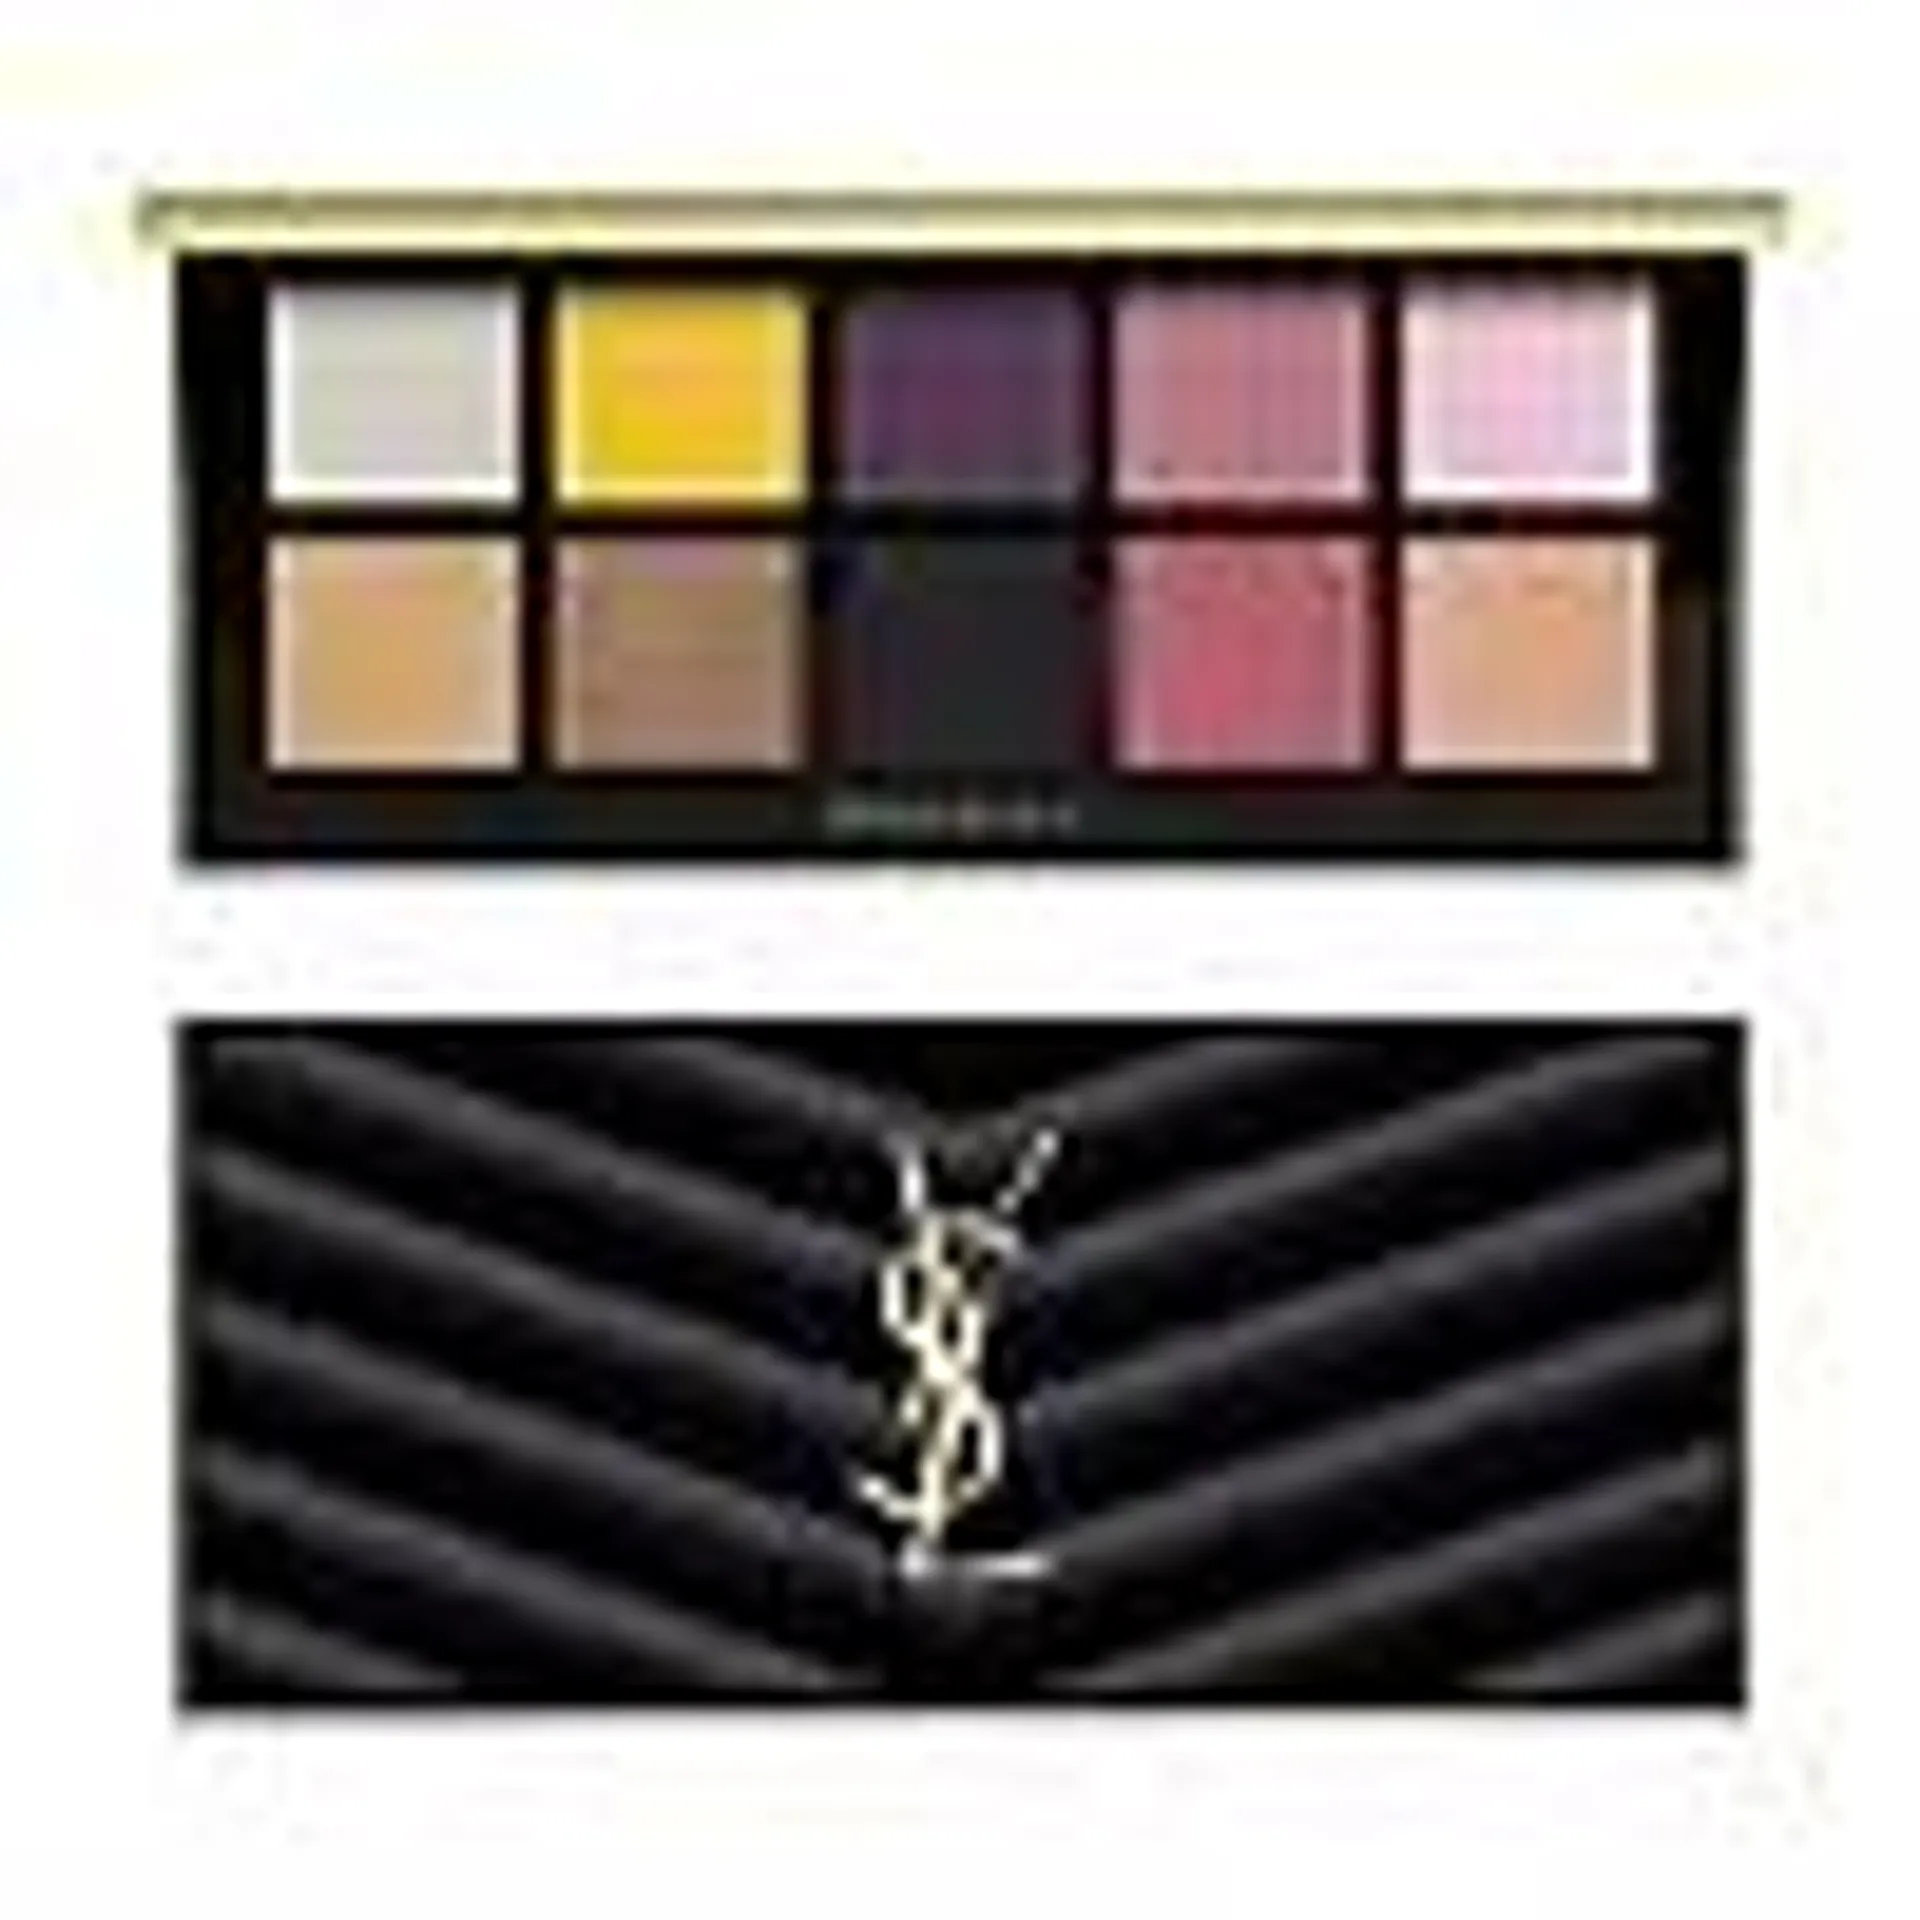 YSL Couture Colour Clutch Eyeshadow Palette